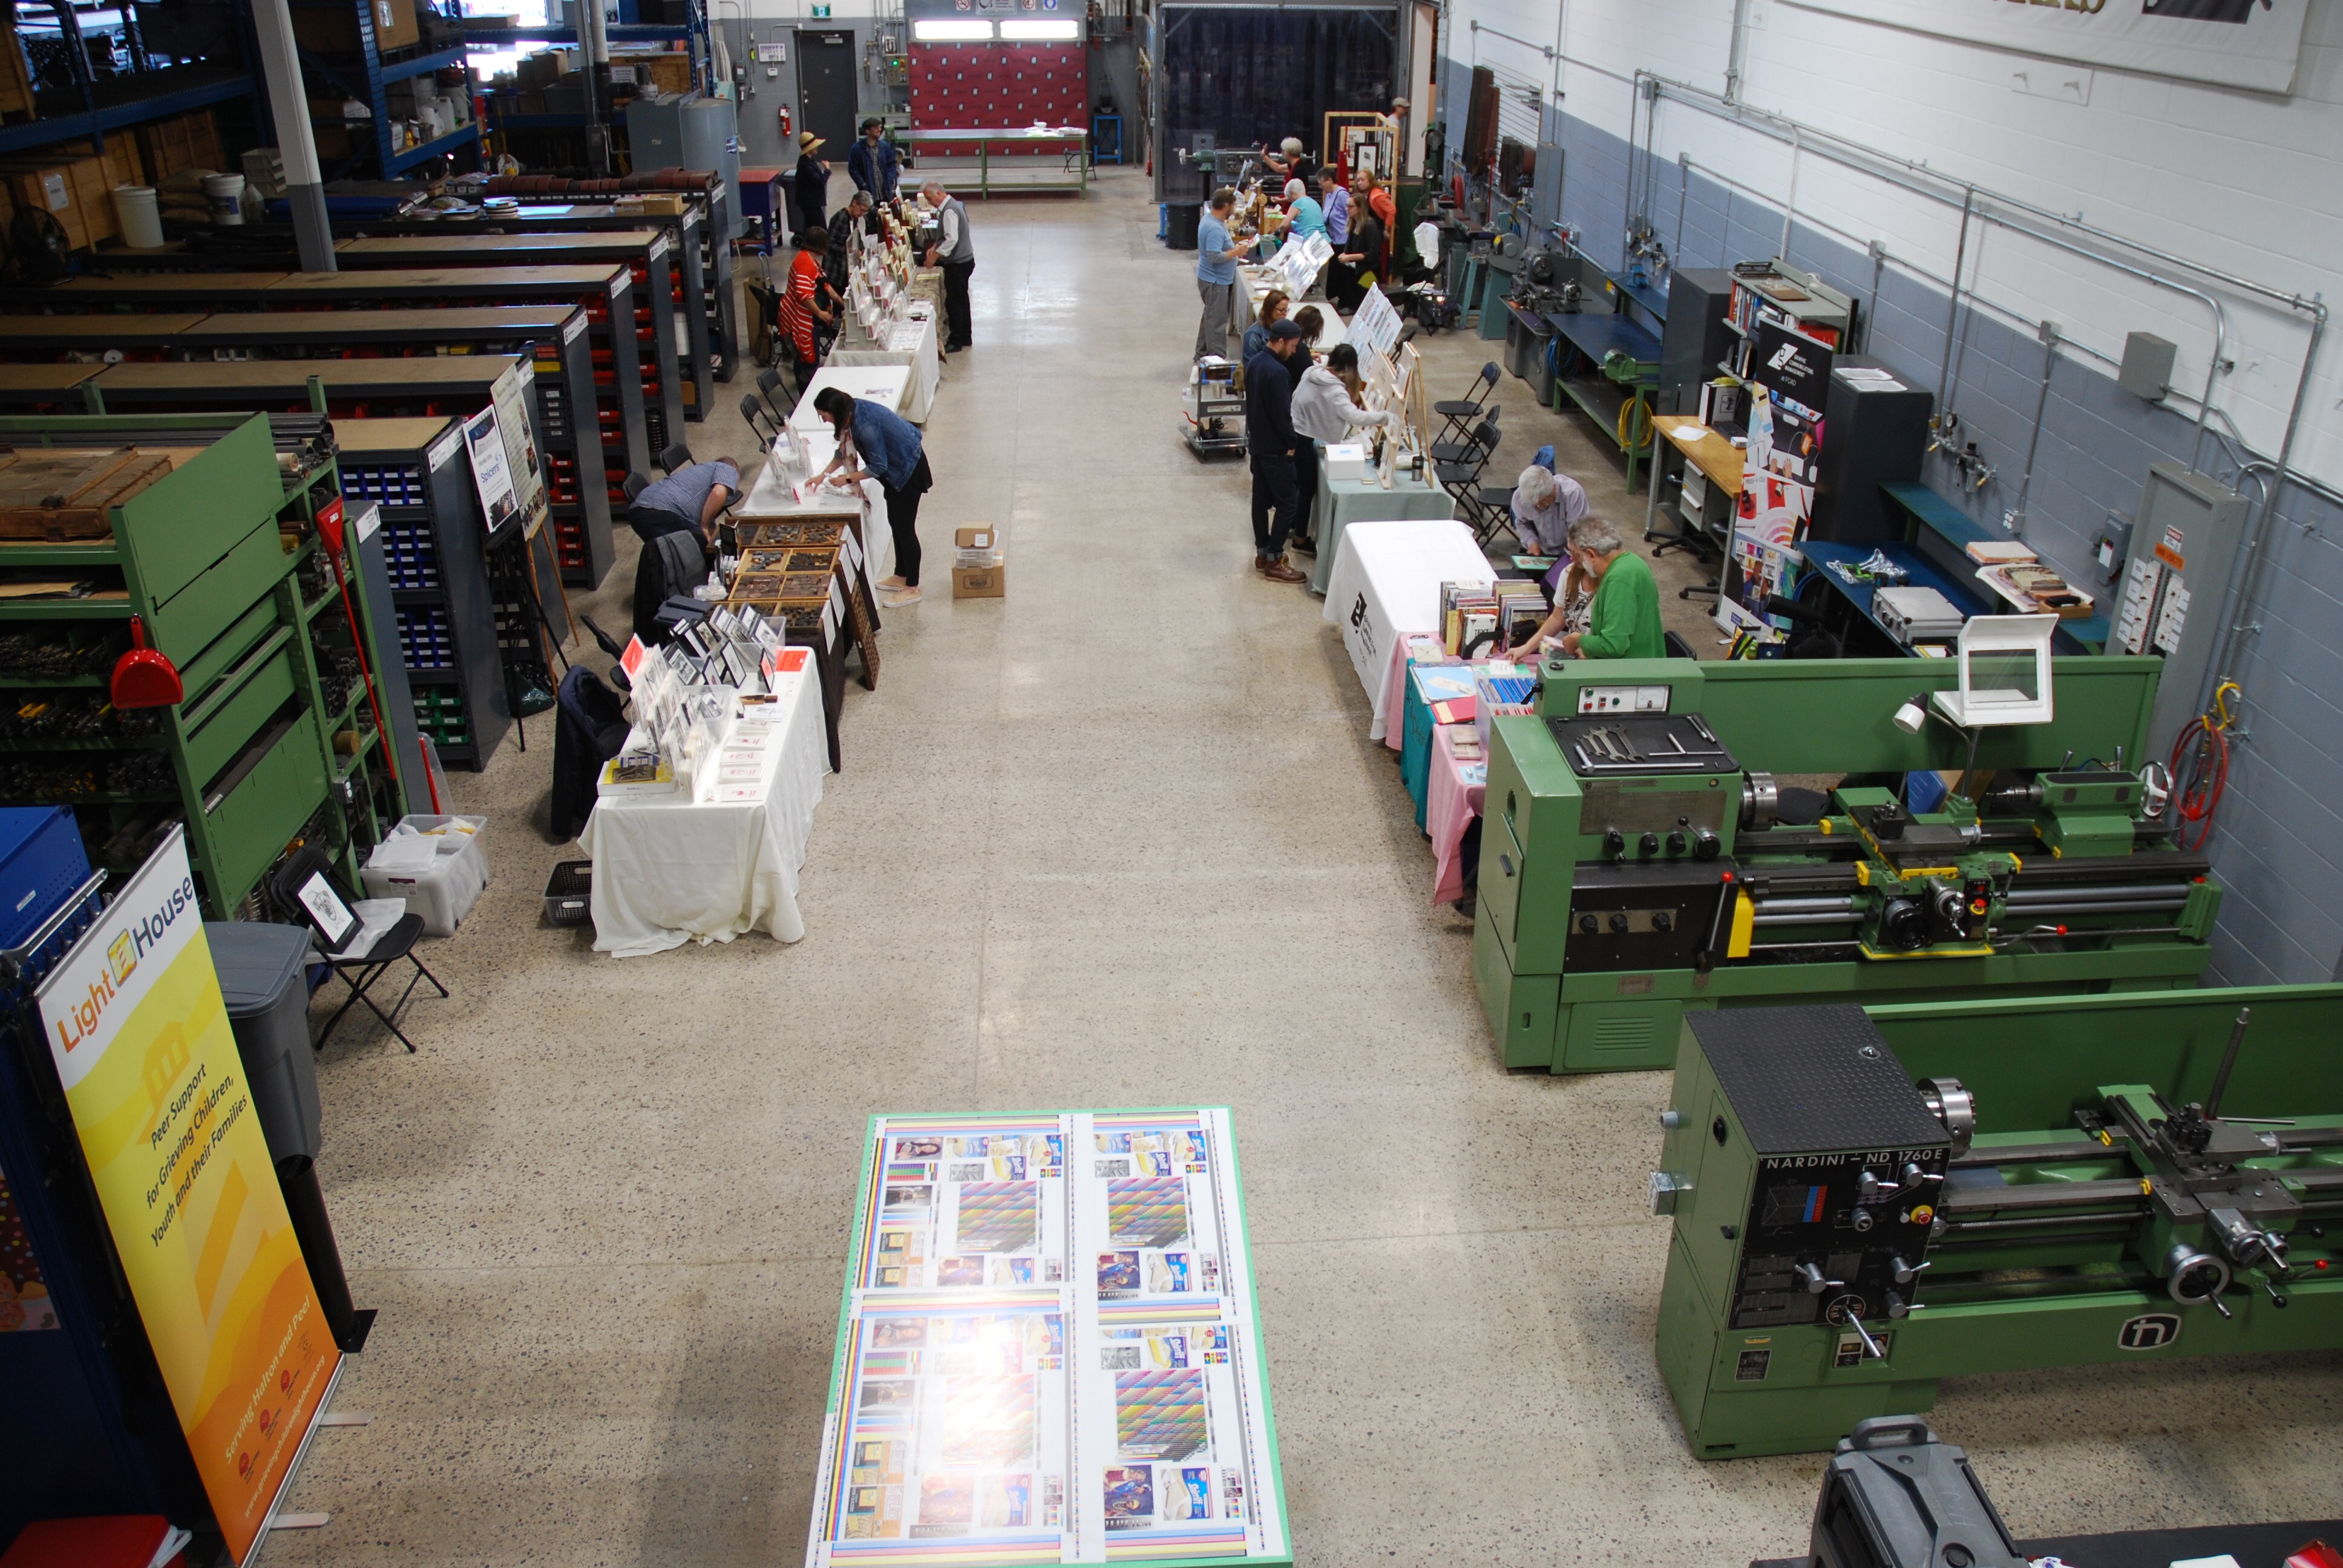 Setup time in the workshop before the fair. Our table is the first on the right, just behind the green lathe. Photo by Liana Howard.